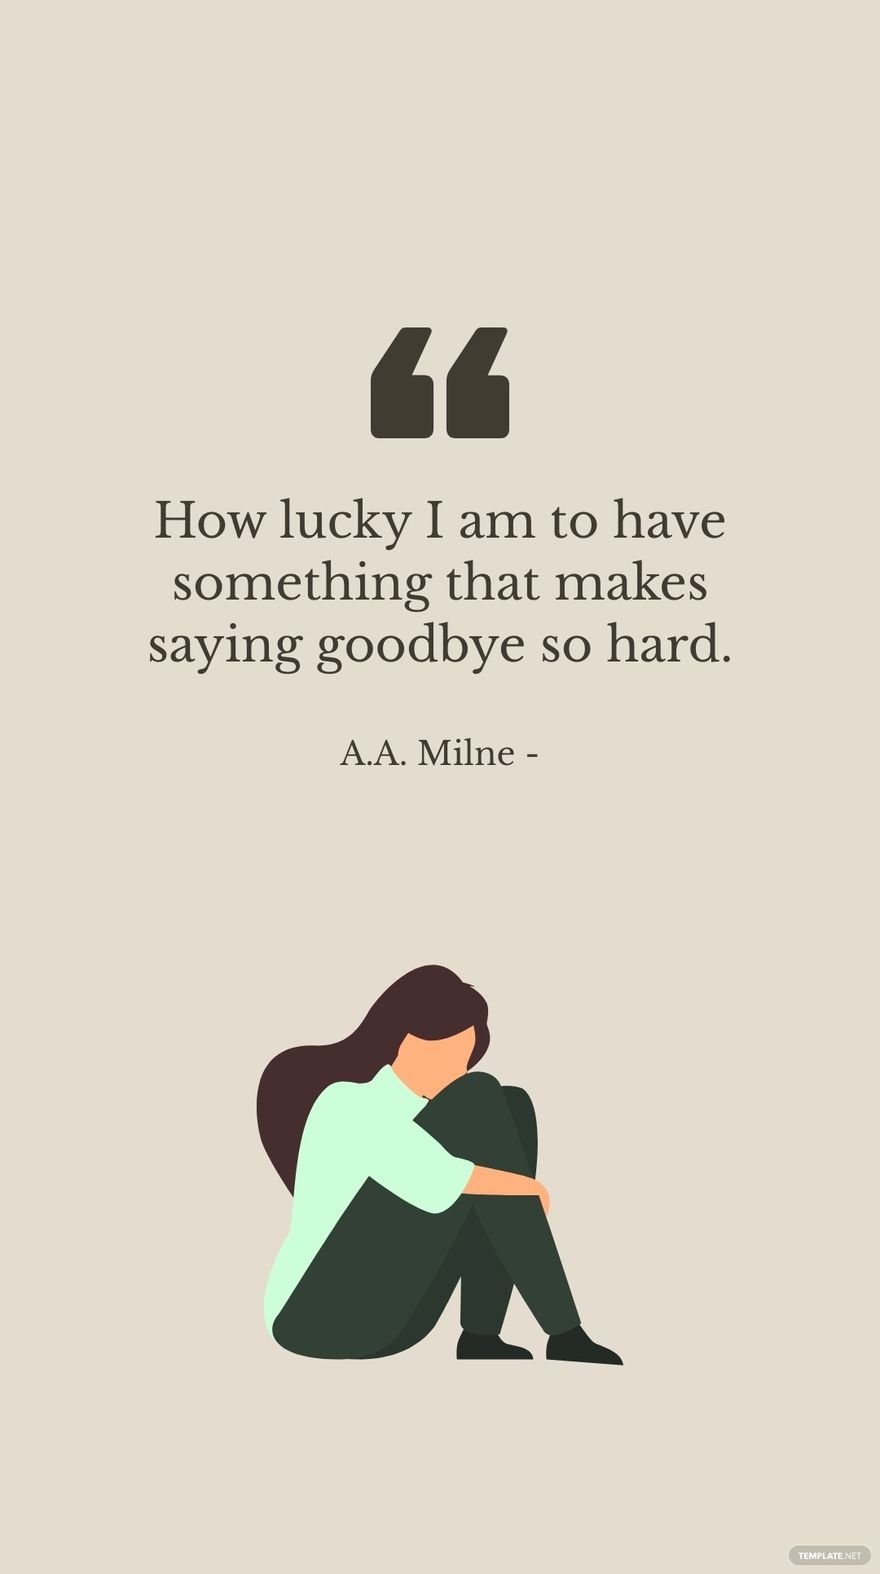 A.A. Milne - How lucky I am to have something that makes saying goodbye so hard. in JPG